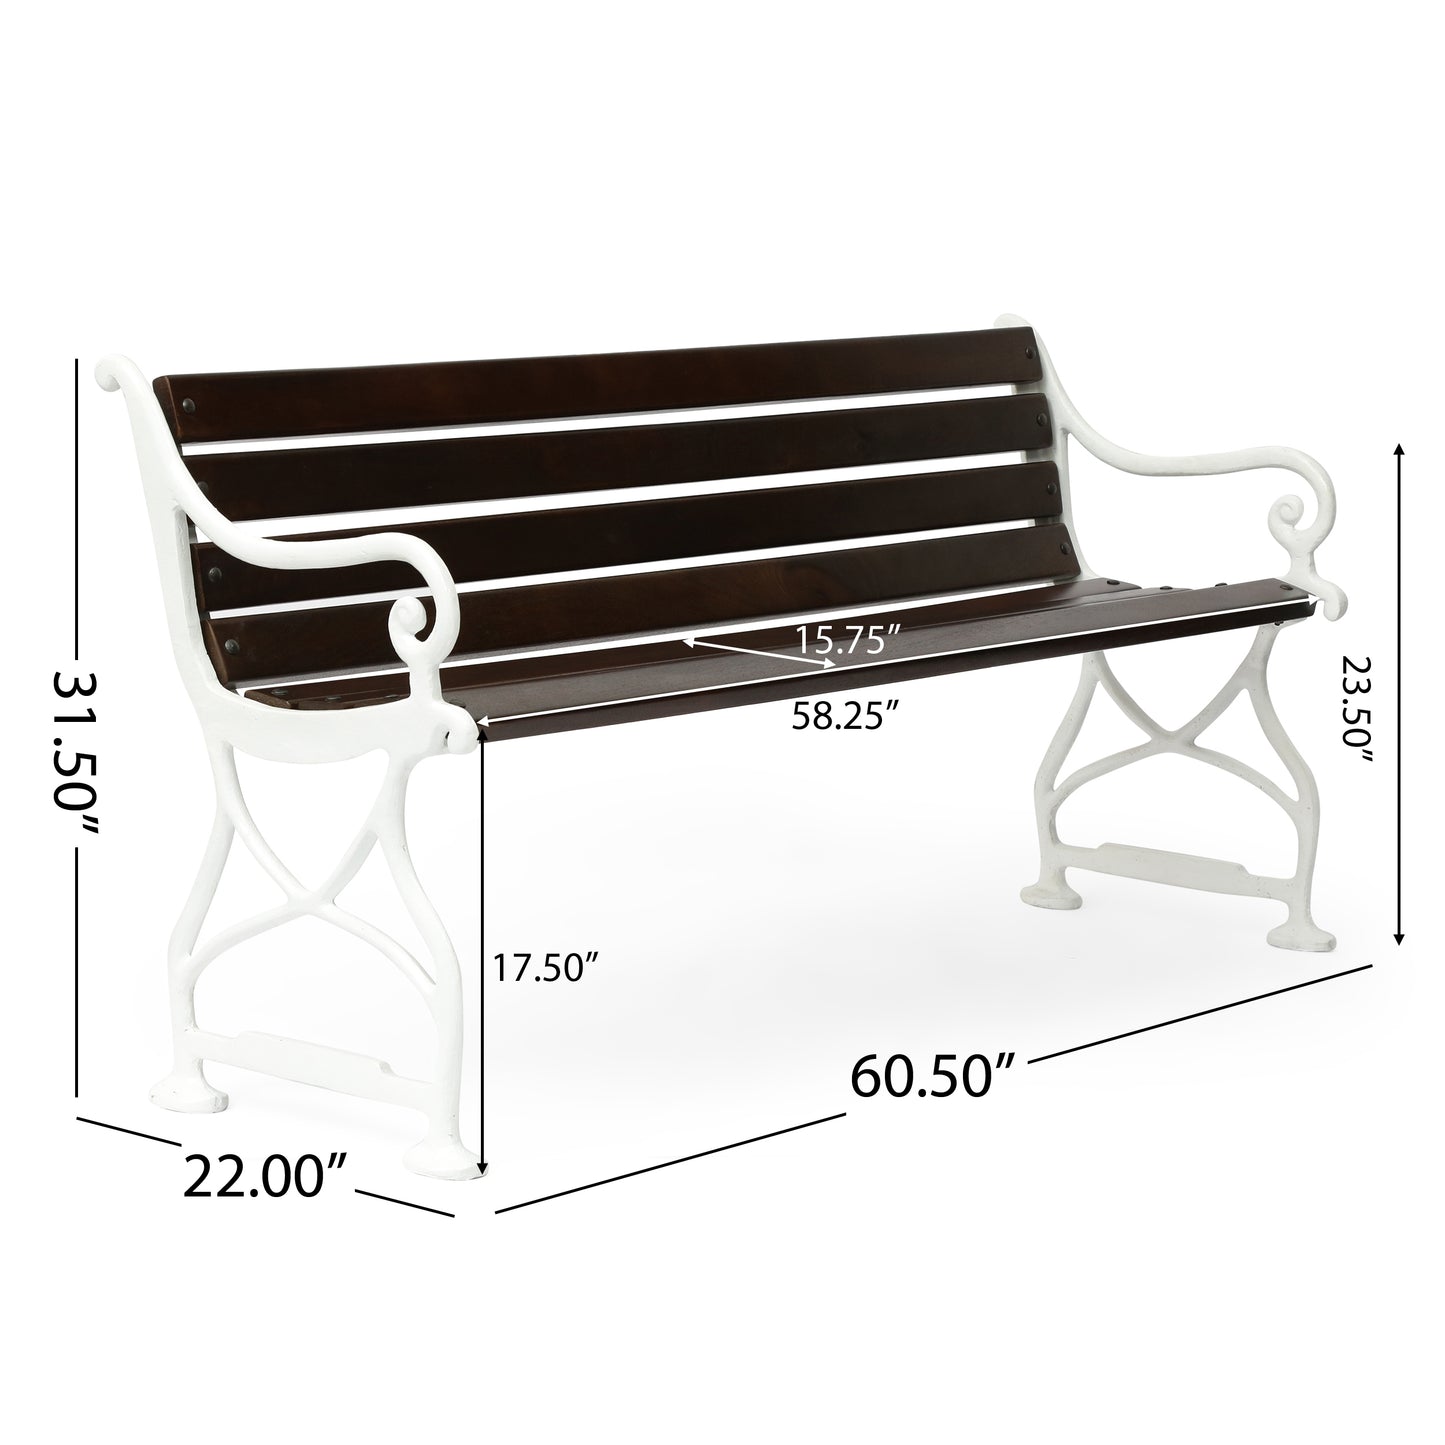 Taber Outdoor Handmade Acacia Wood Bench, Rustic Brown and White